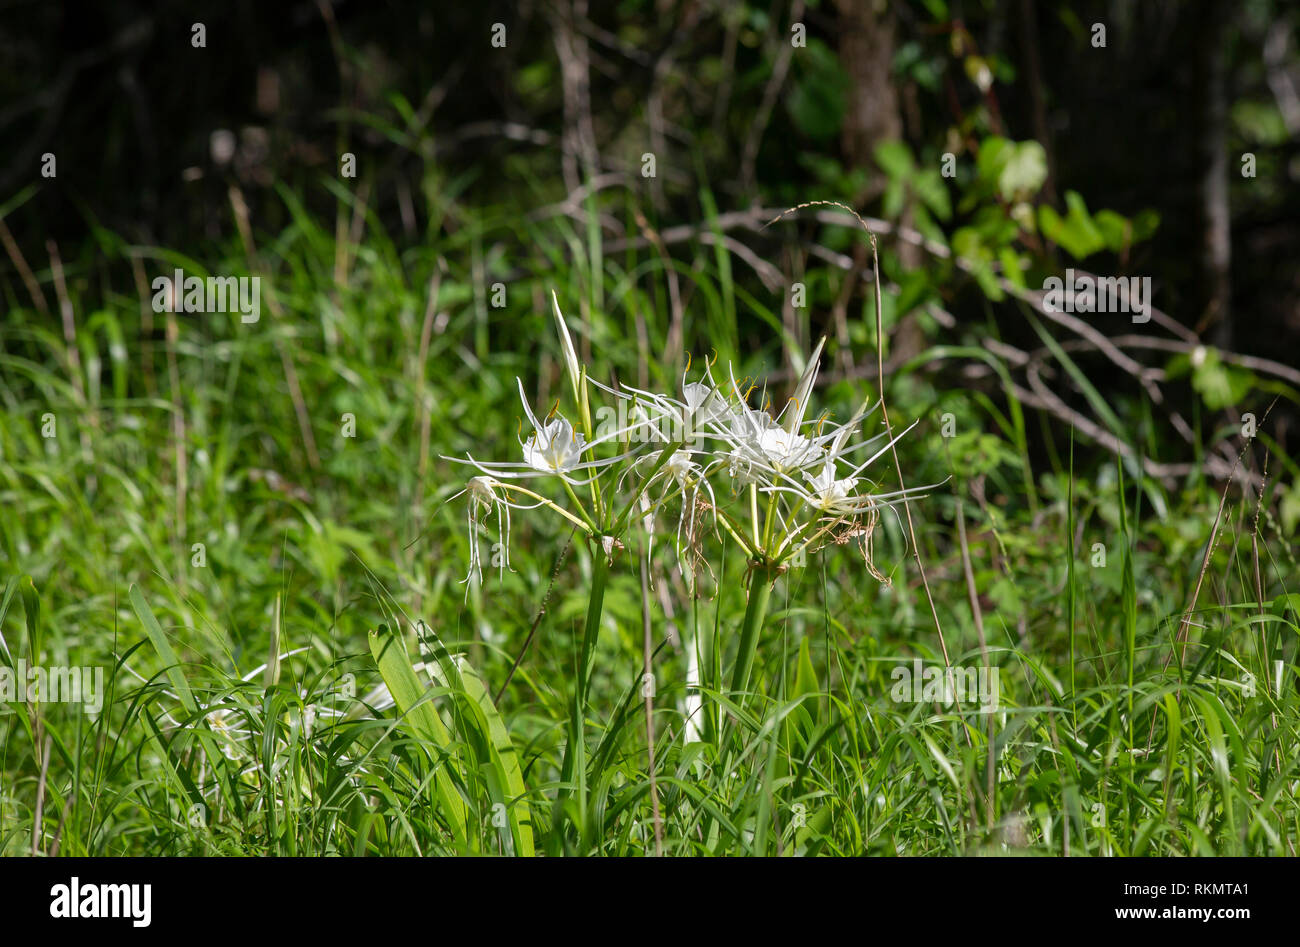 Bouquet of spider lilies growing in an overgrown field Stock Photo